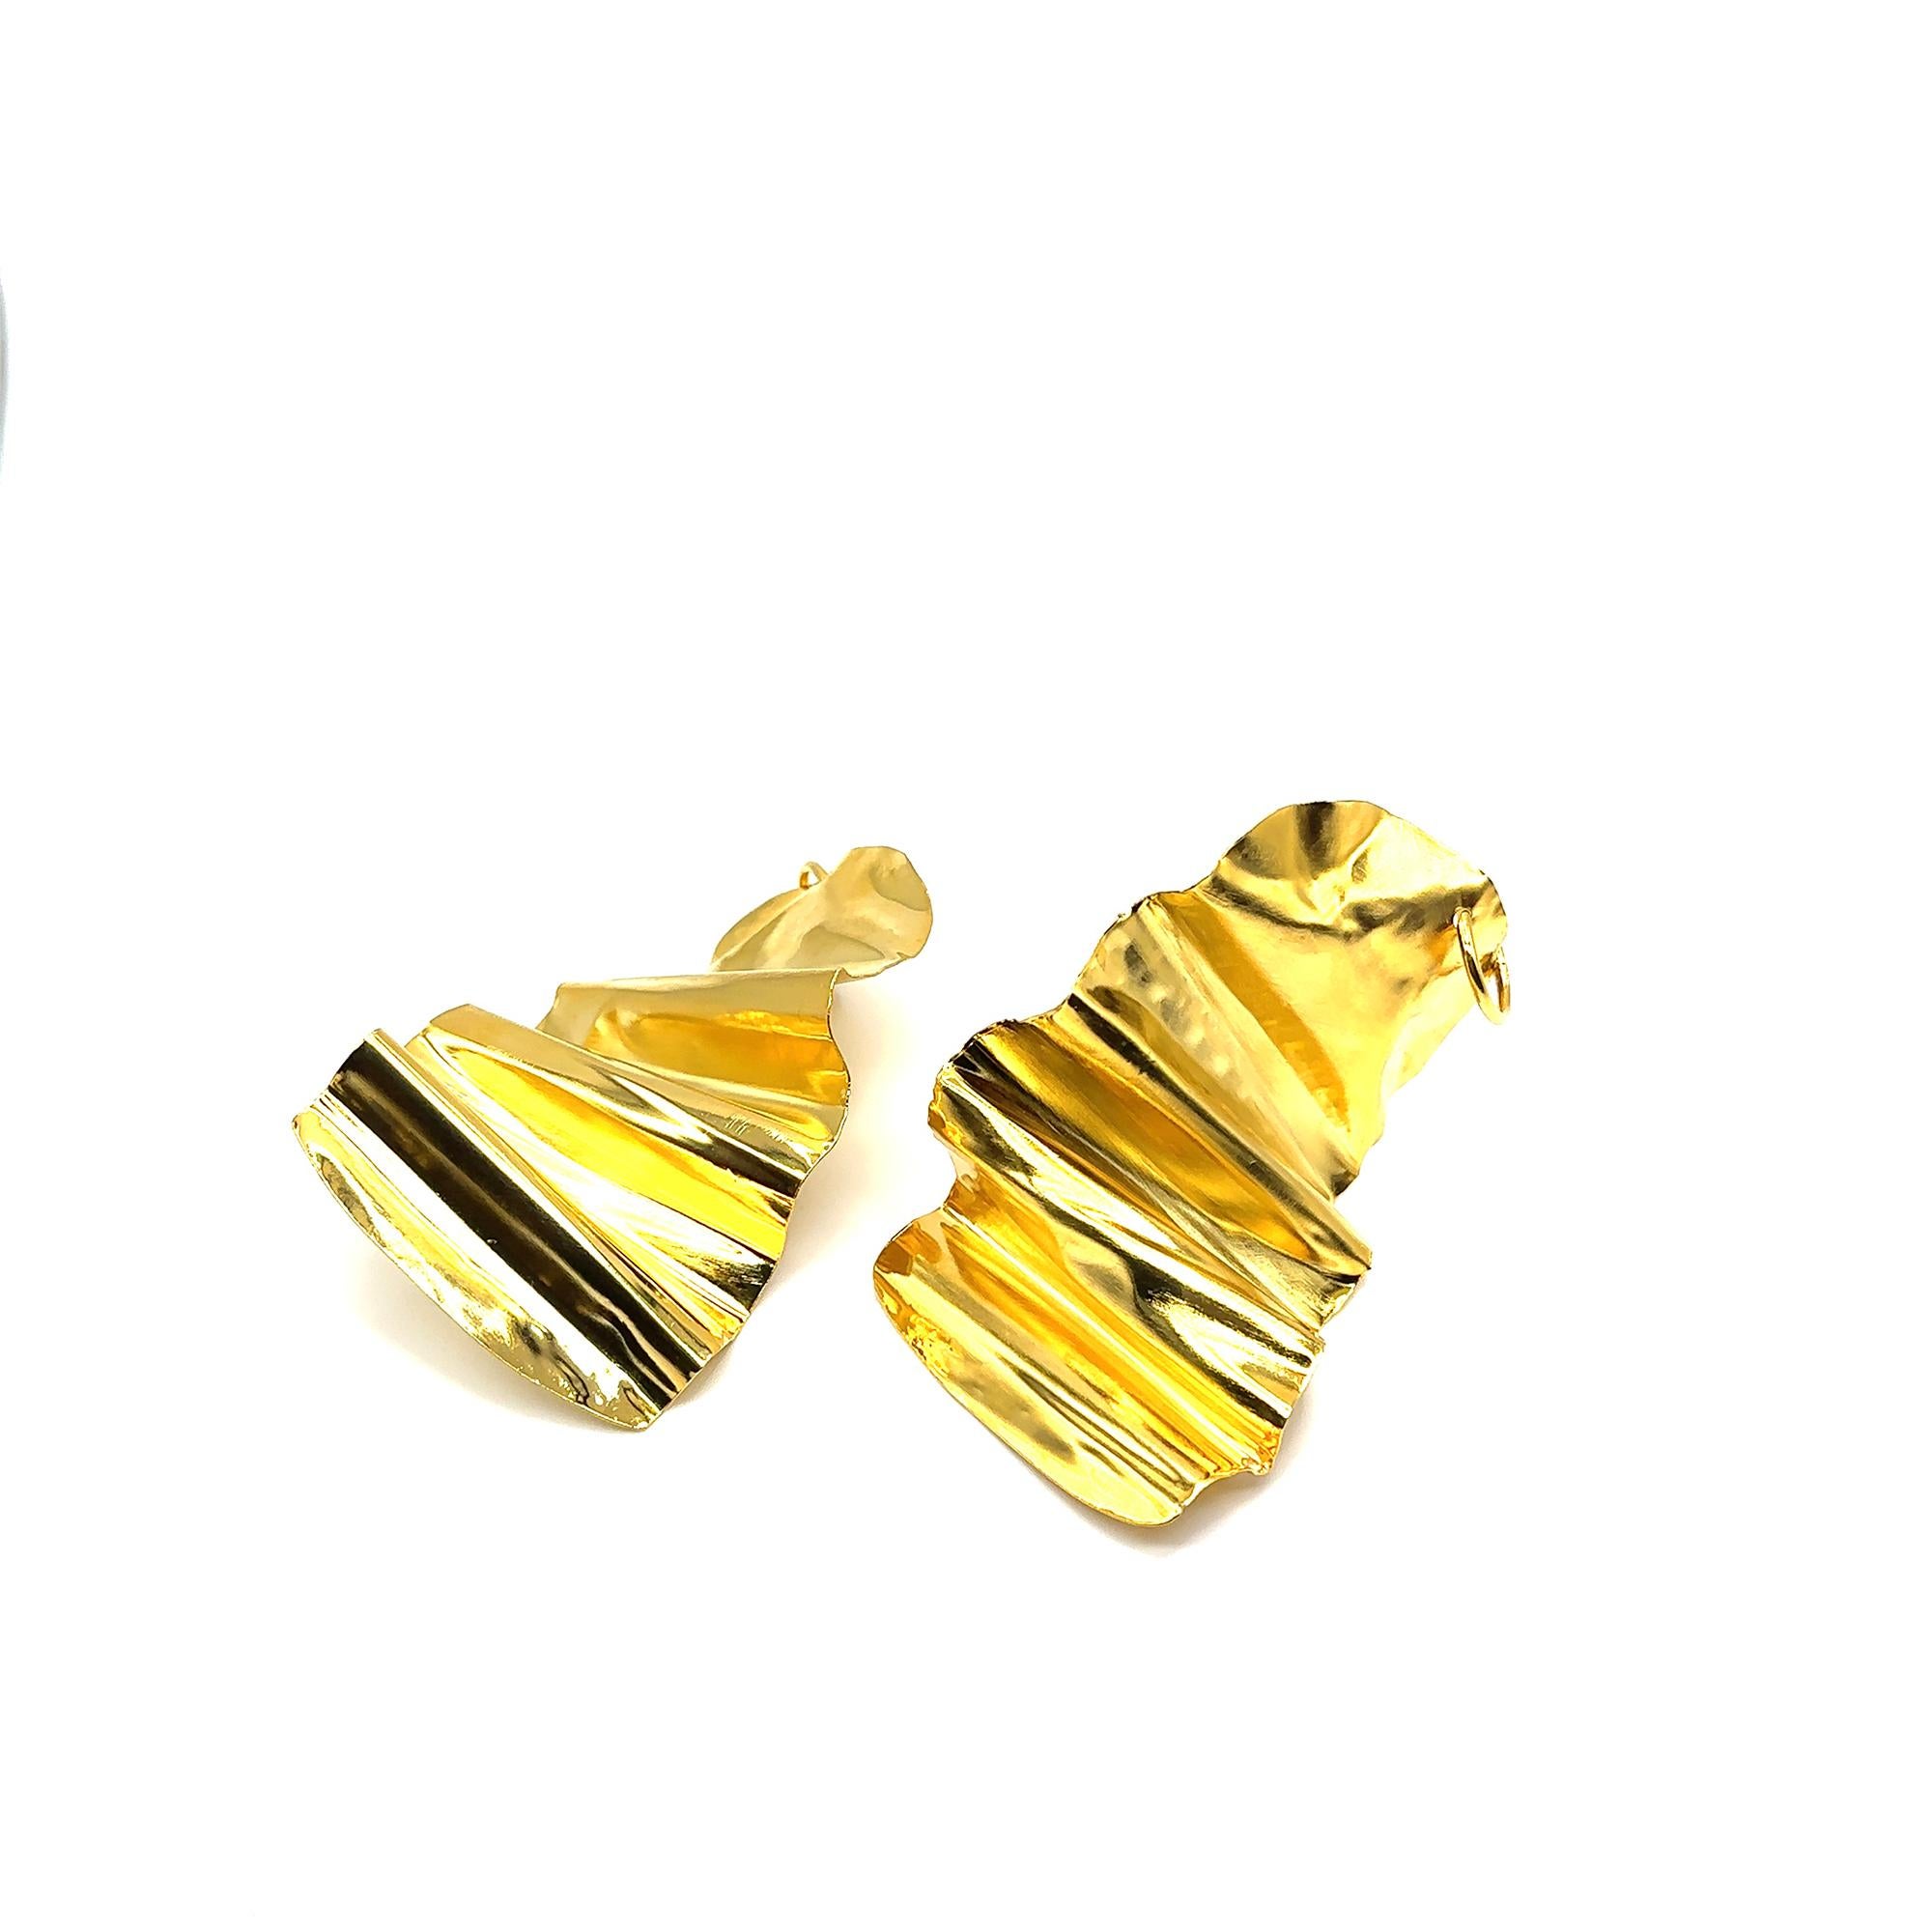 Ursula - Dangle Earrings 14k gold plated In New Condition For Sale In Forest Hills, NY